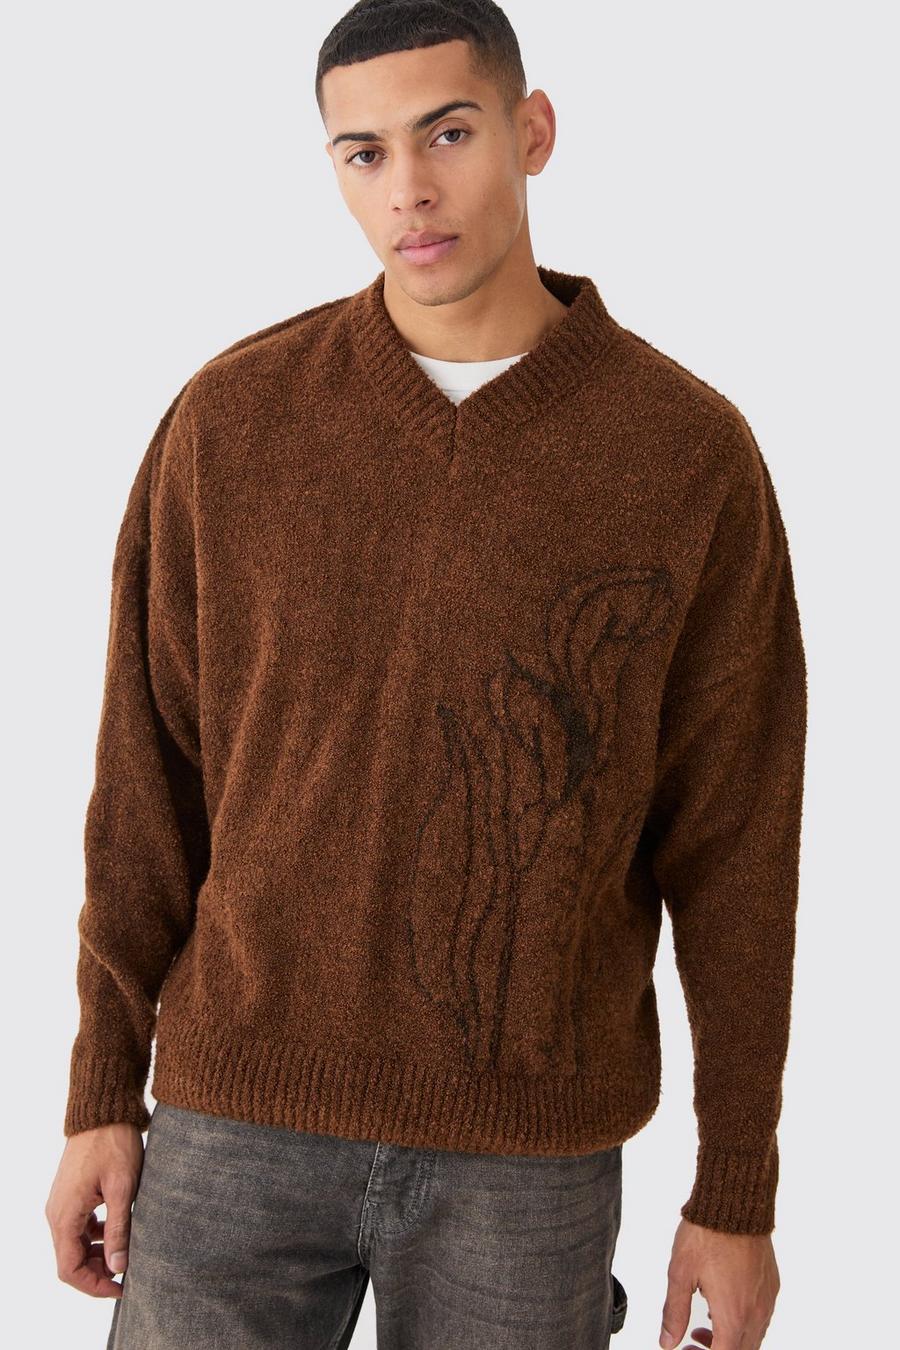 Rust Boxy V Neck Boucle Textured Knit Sweater